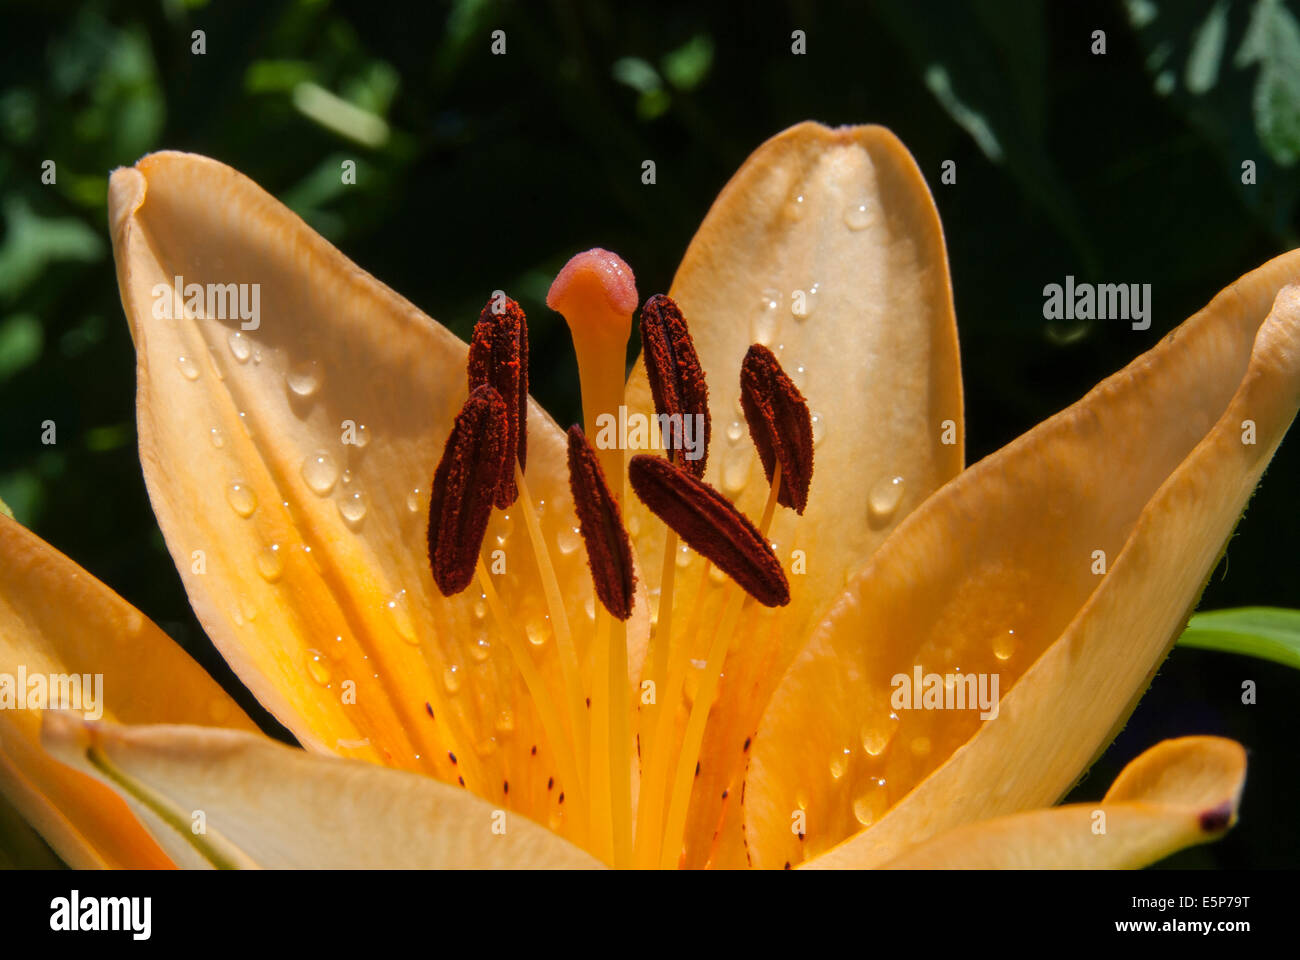 Pistil, anther, stigma style and stamen detail on lily blossom Stock Photo